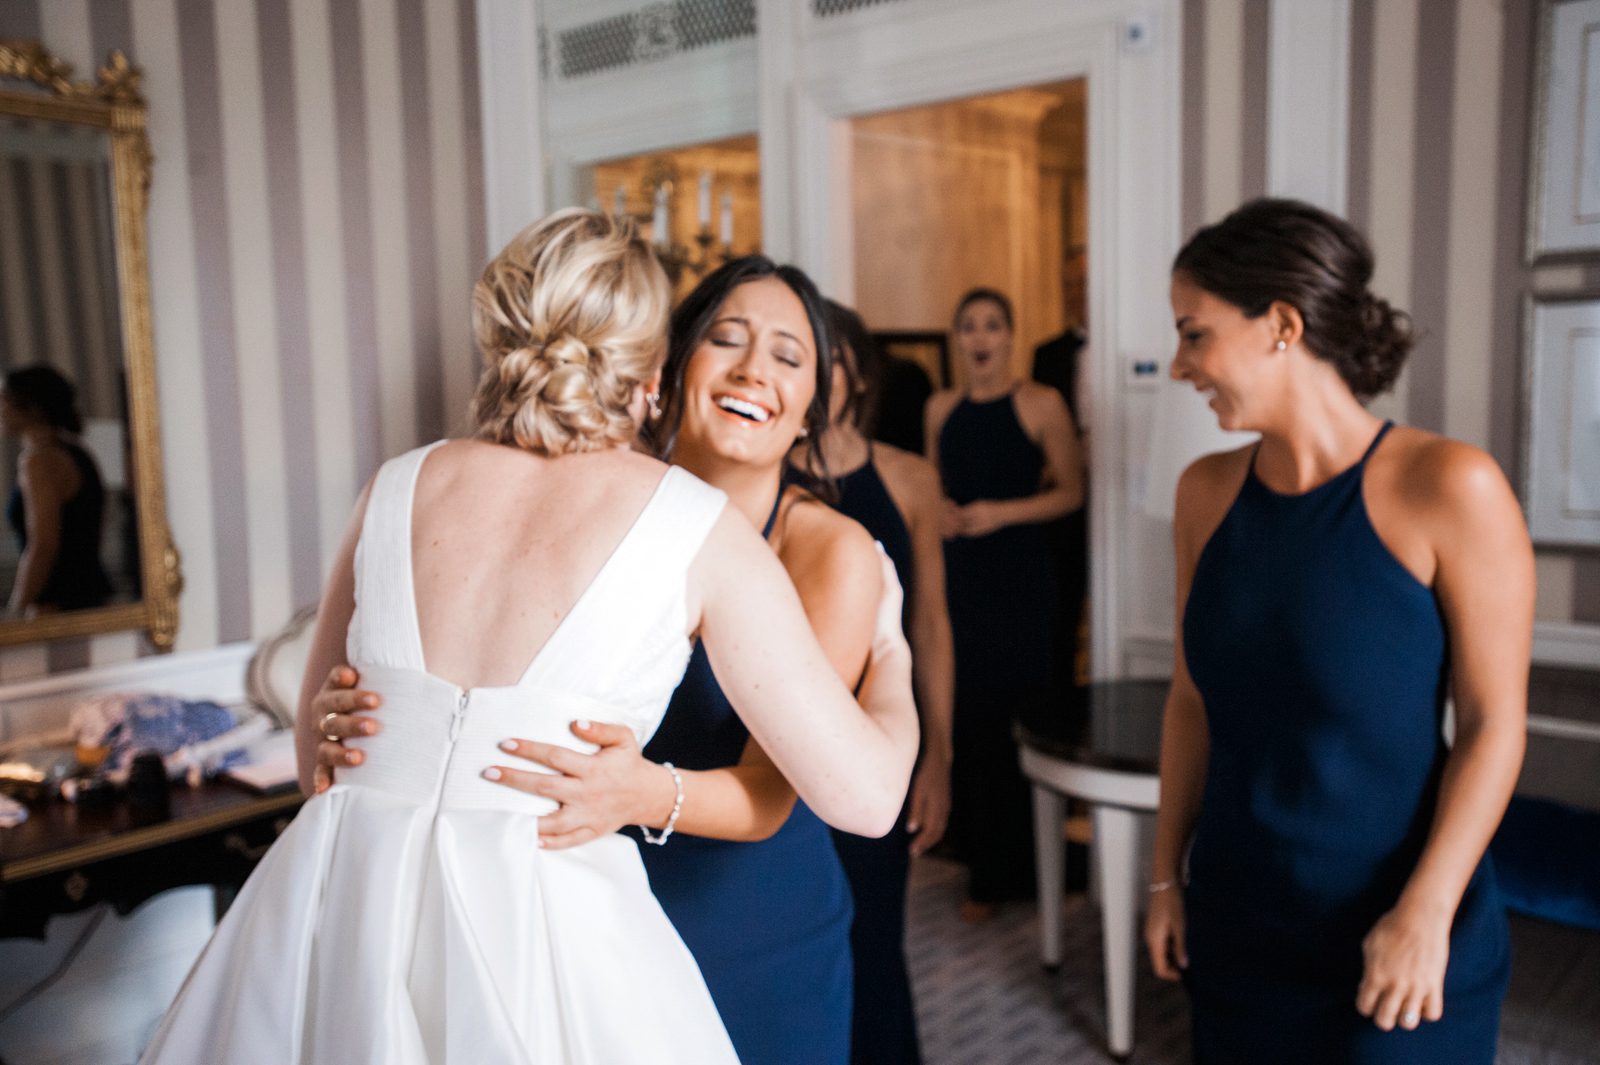 Bride hugging her friend with a group of women behind